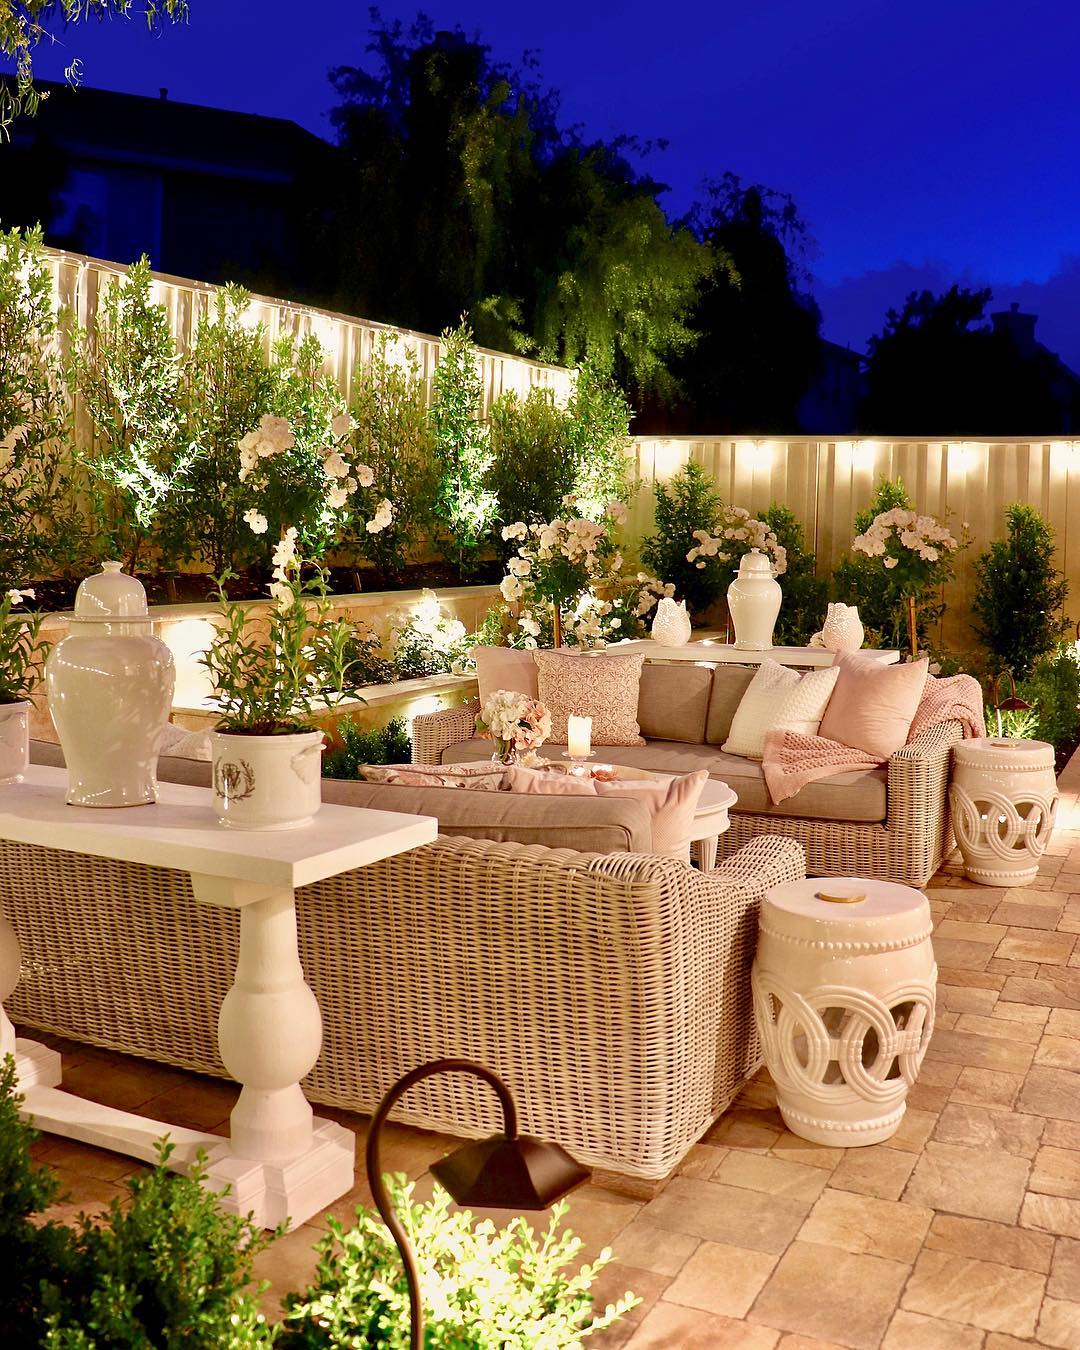 Backyard Living Space with Lots of Landscape Lighting. Photo by Instagram user @kristywicks